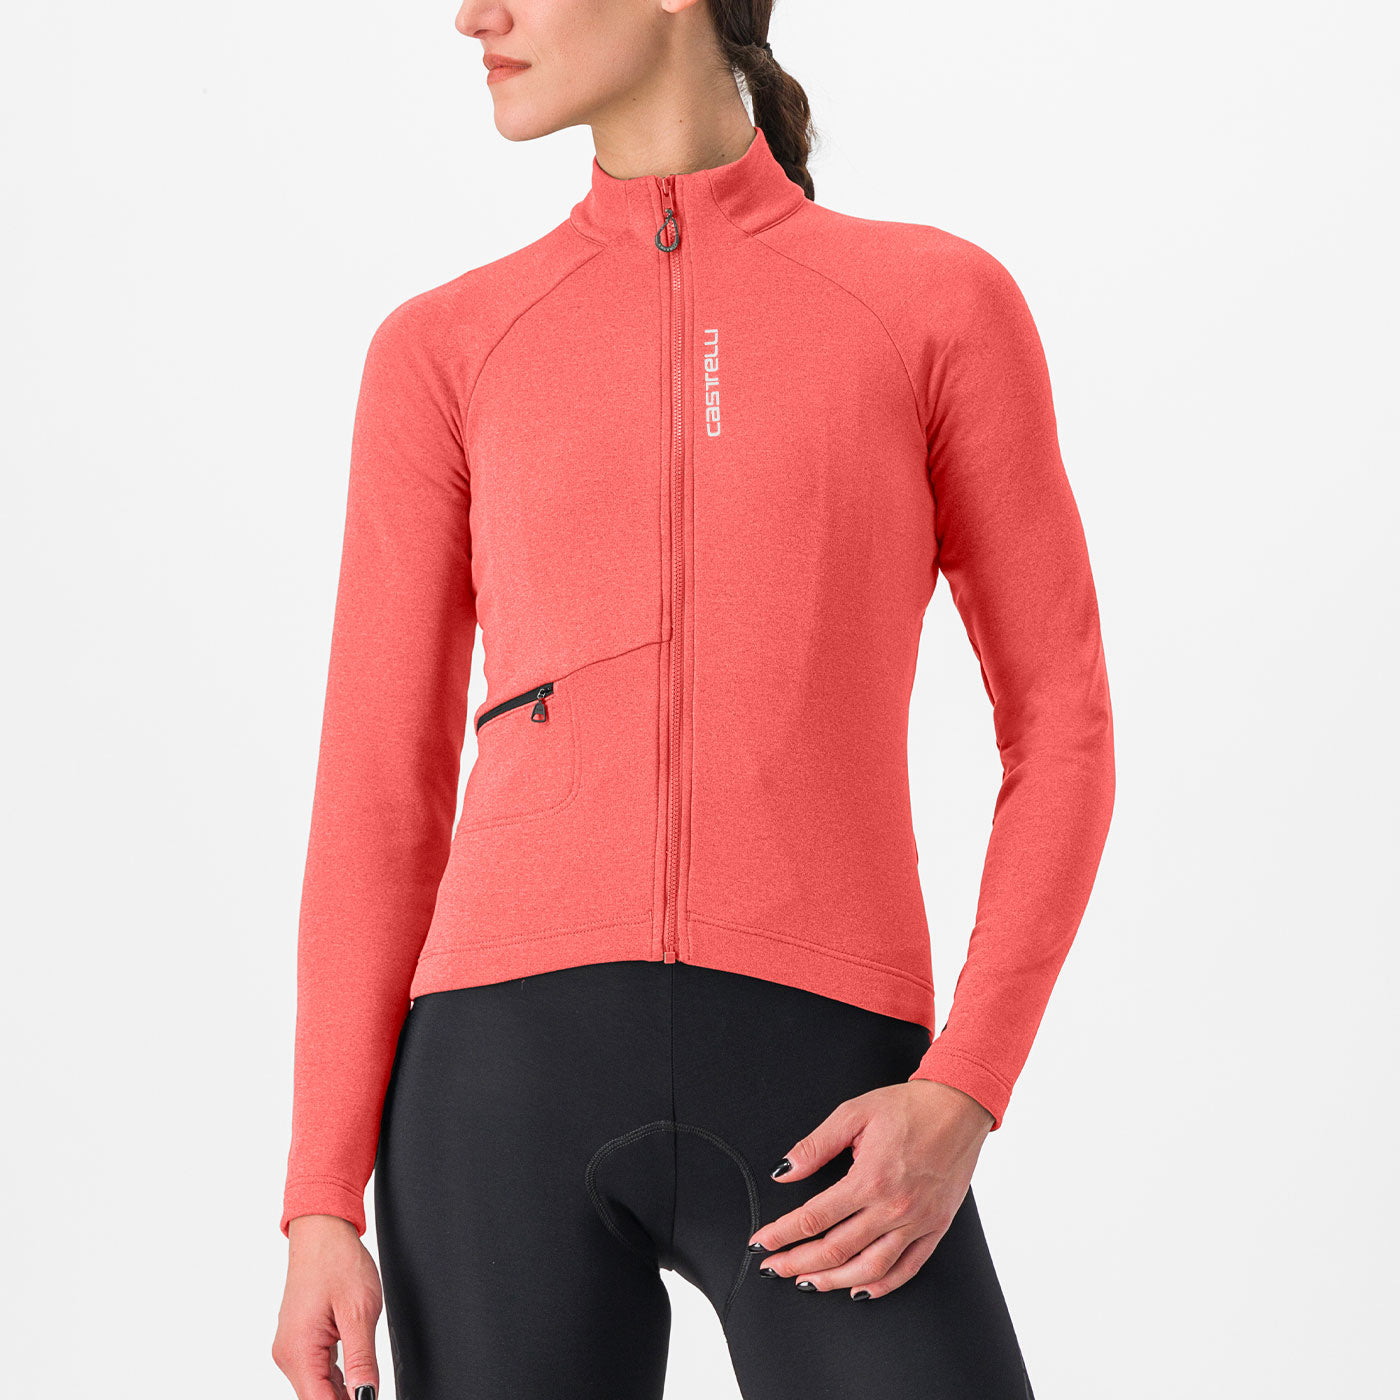 Castelli Unlimited Trail woman long sleeves jersey - Pink